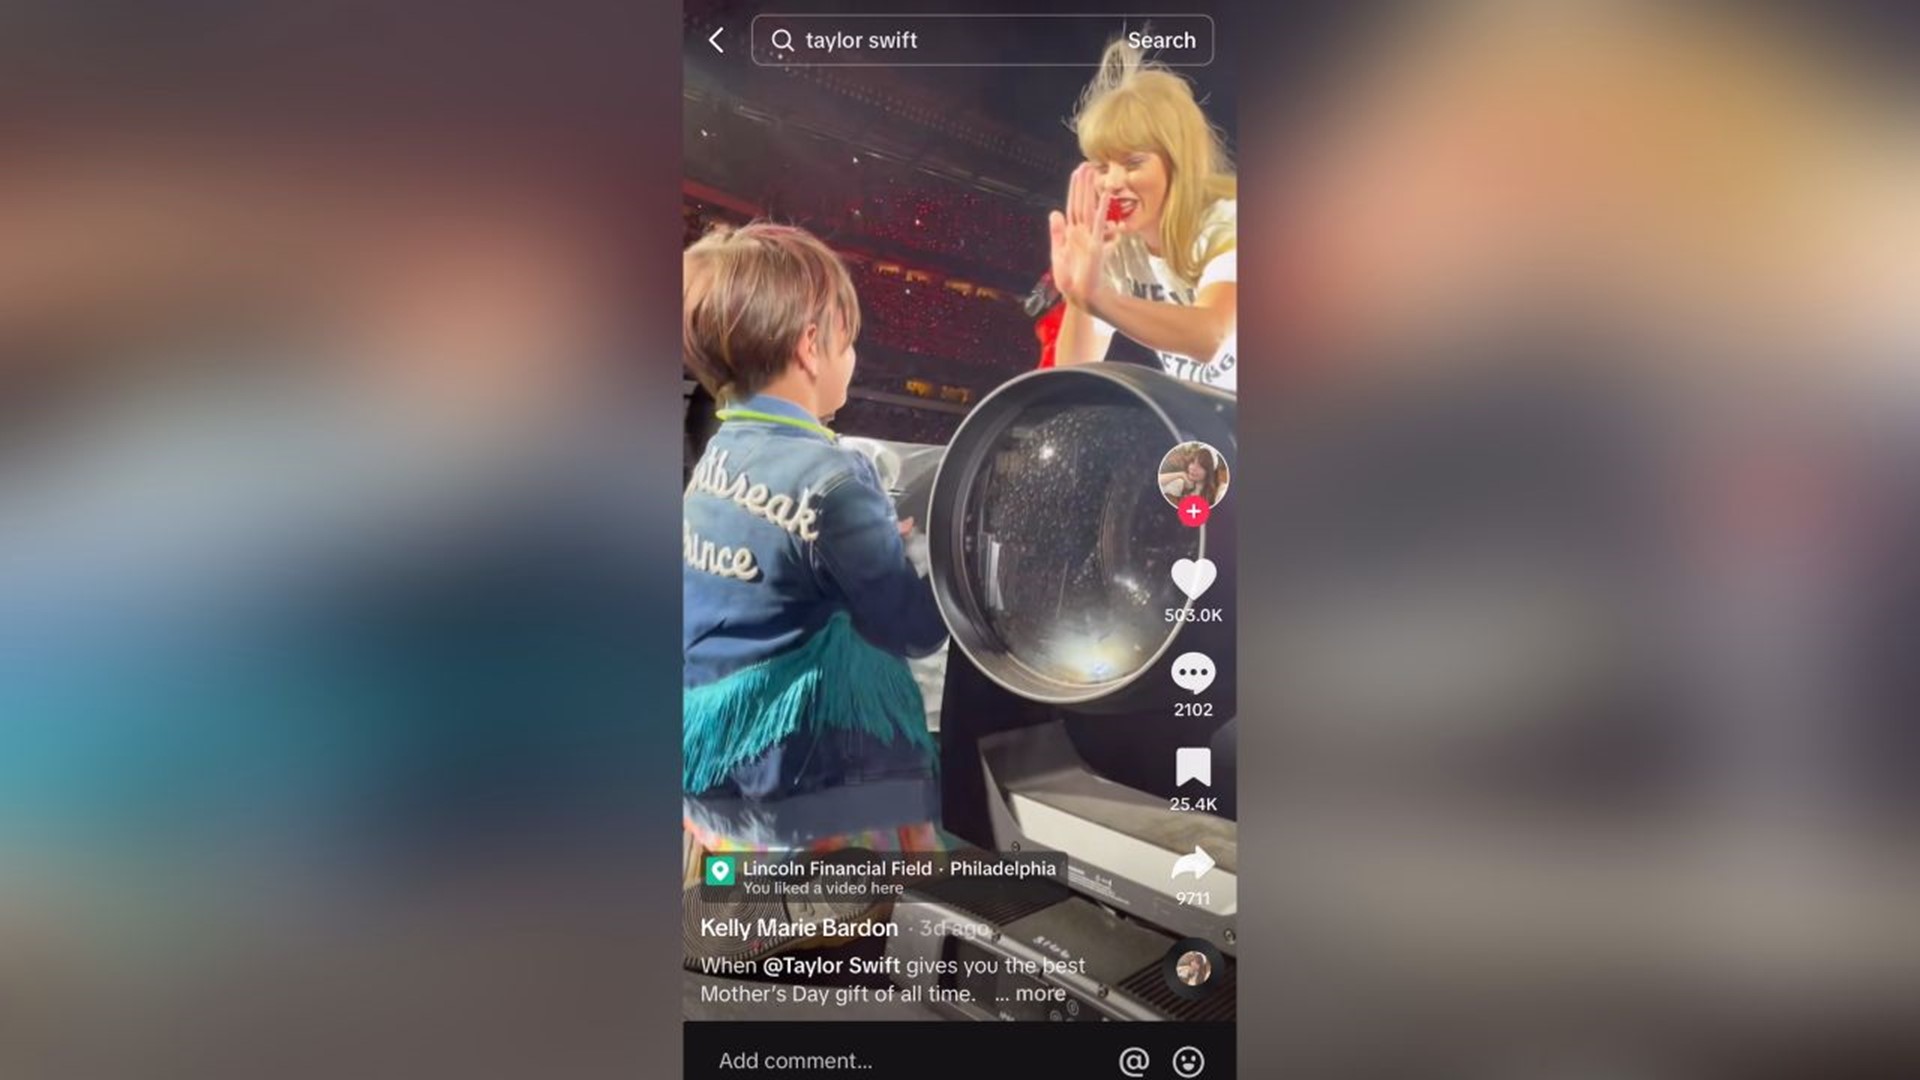 Milo Haddad, 7, was picked out of the crowd Sunday night to receive a very special gift from Taylor during the show.